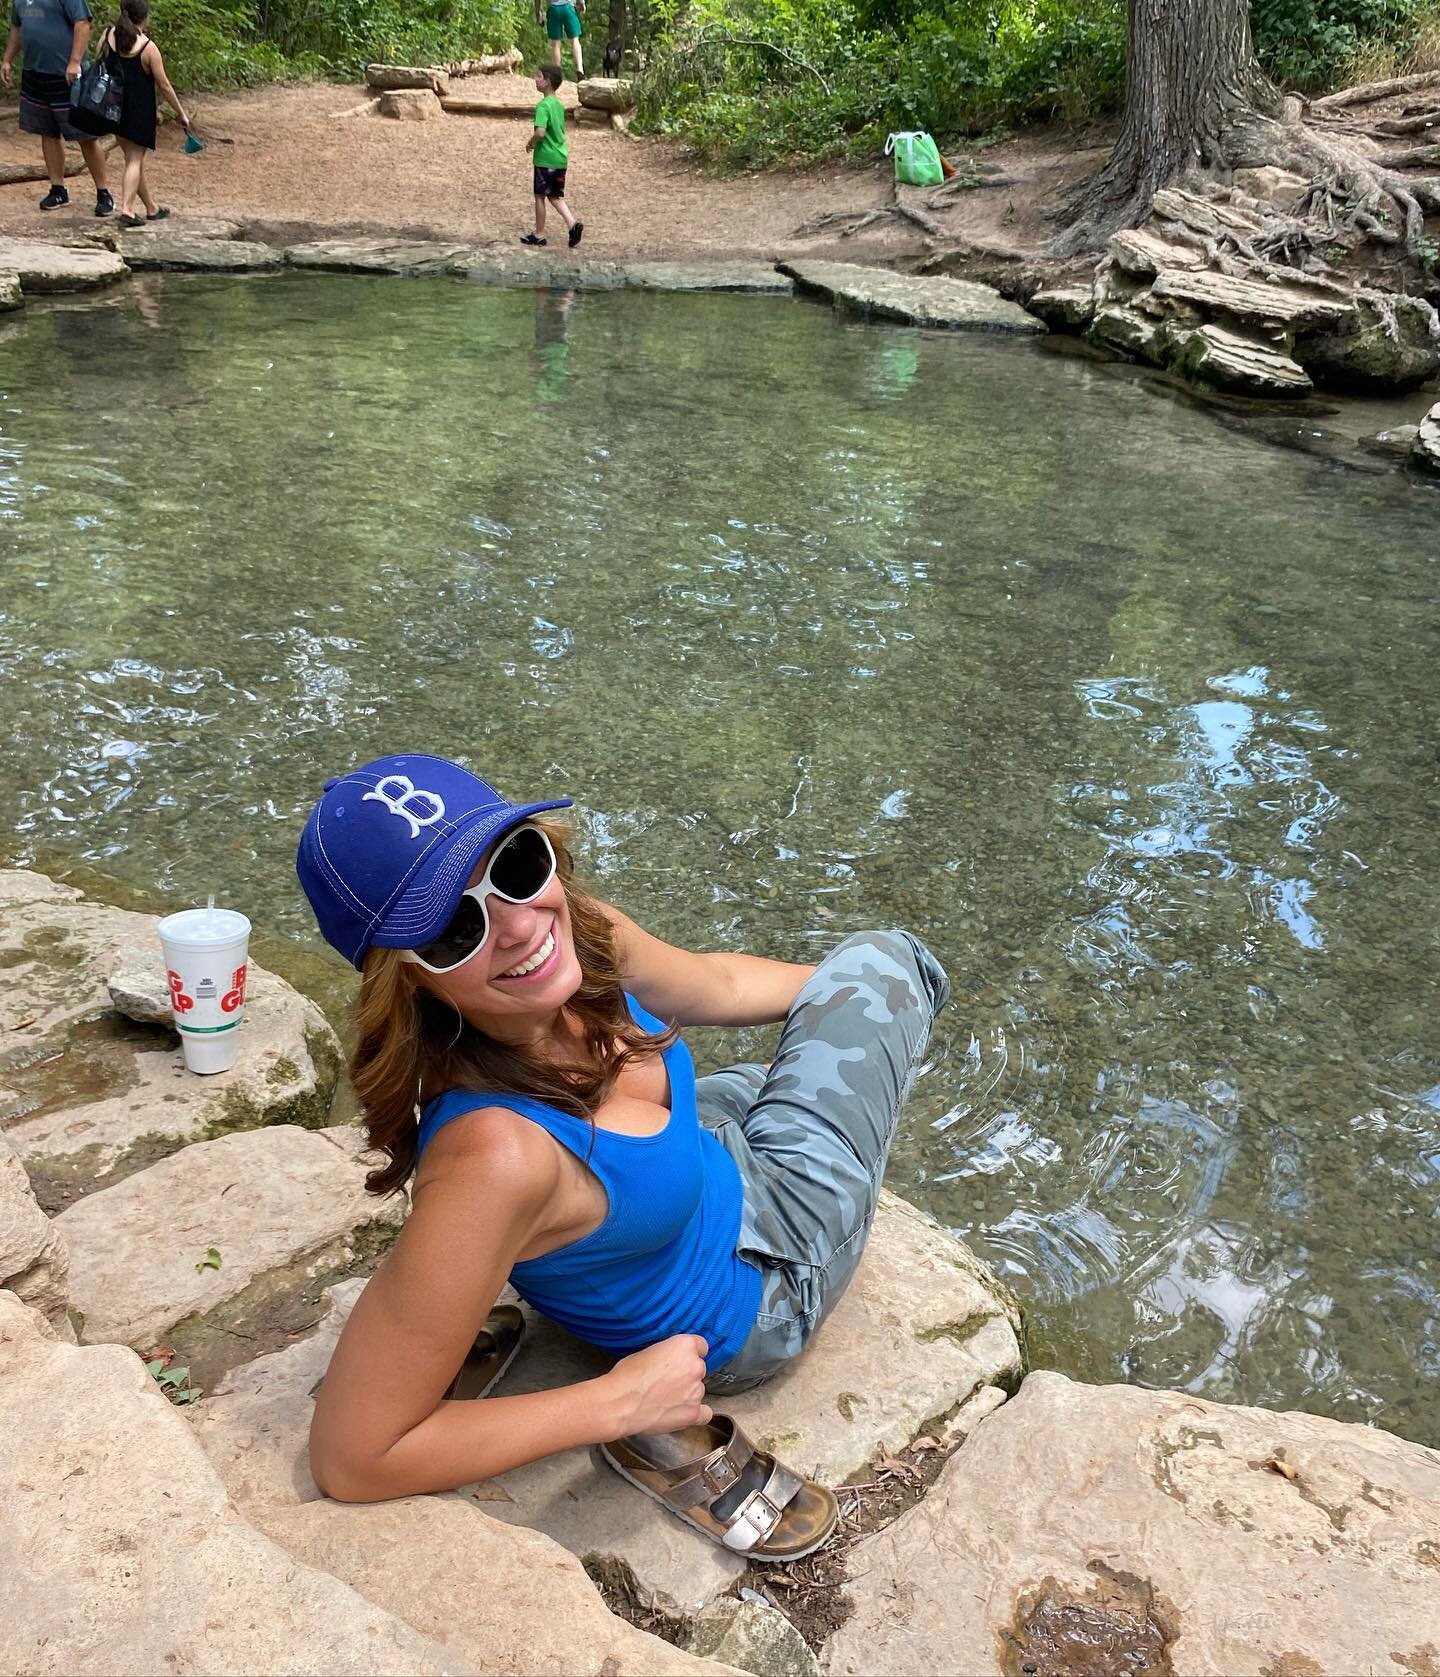 Hot springs in the winter. Cold springs in the summer. #livingmybestlife #coldspring #happy #state #park #bigfoot